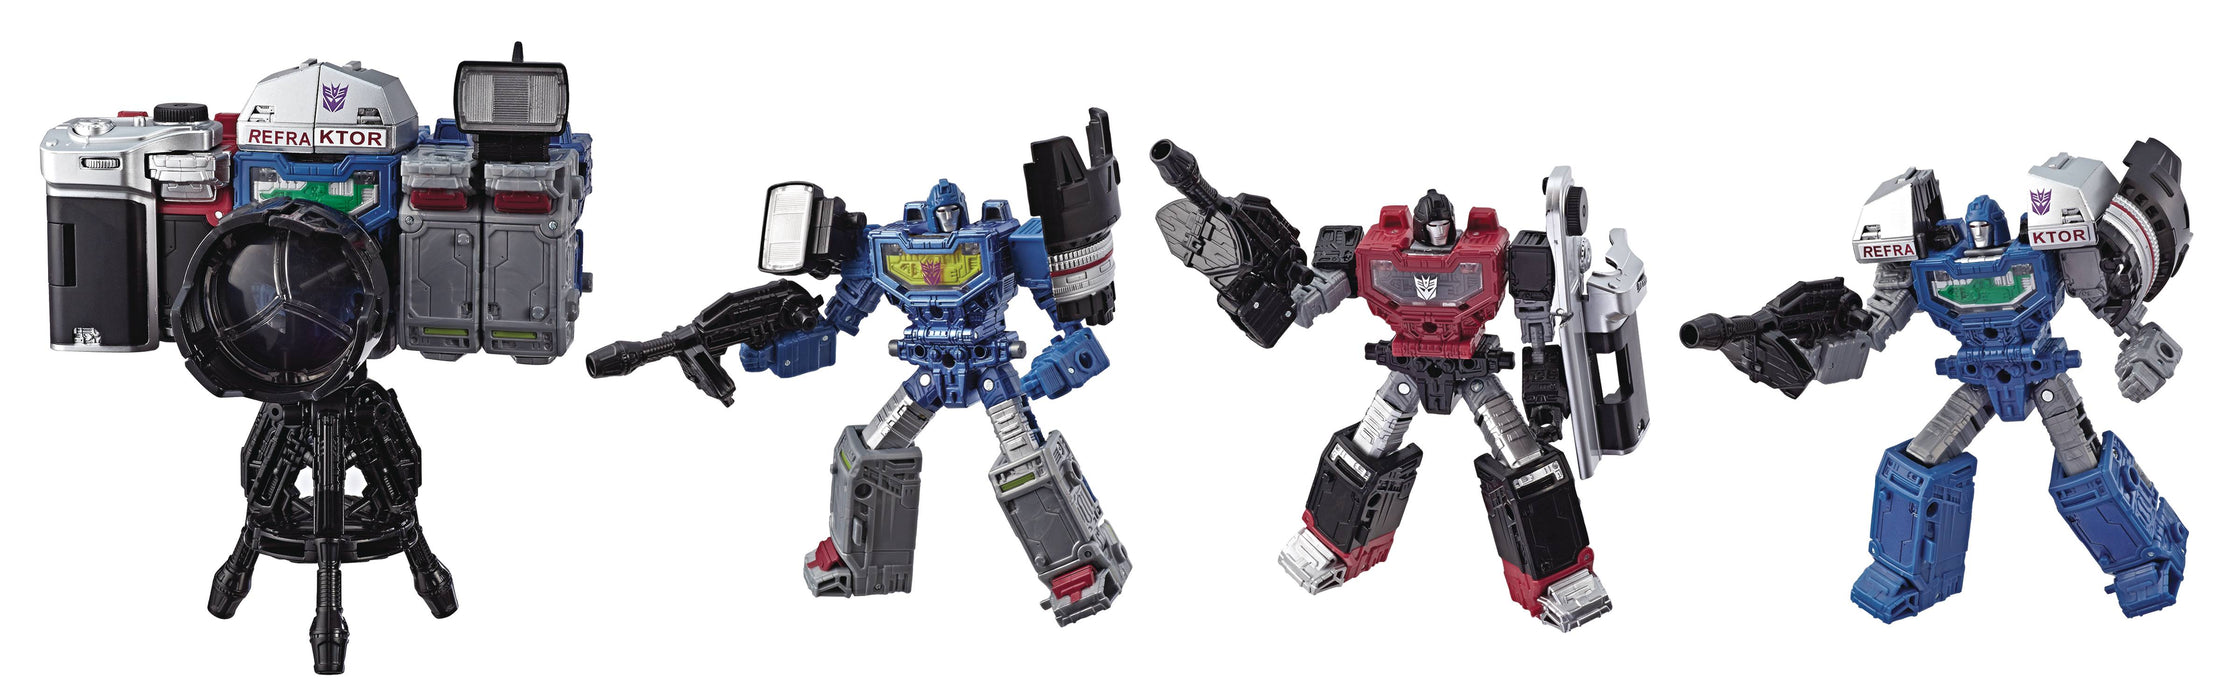 Transformers Generations War for Cybertron Refraktor Deluxe 3 Pack